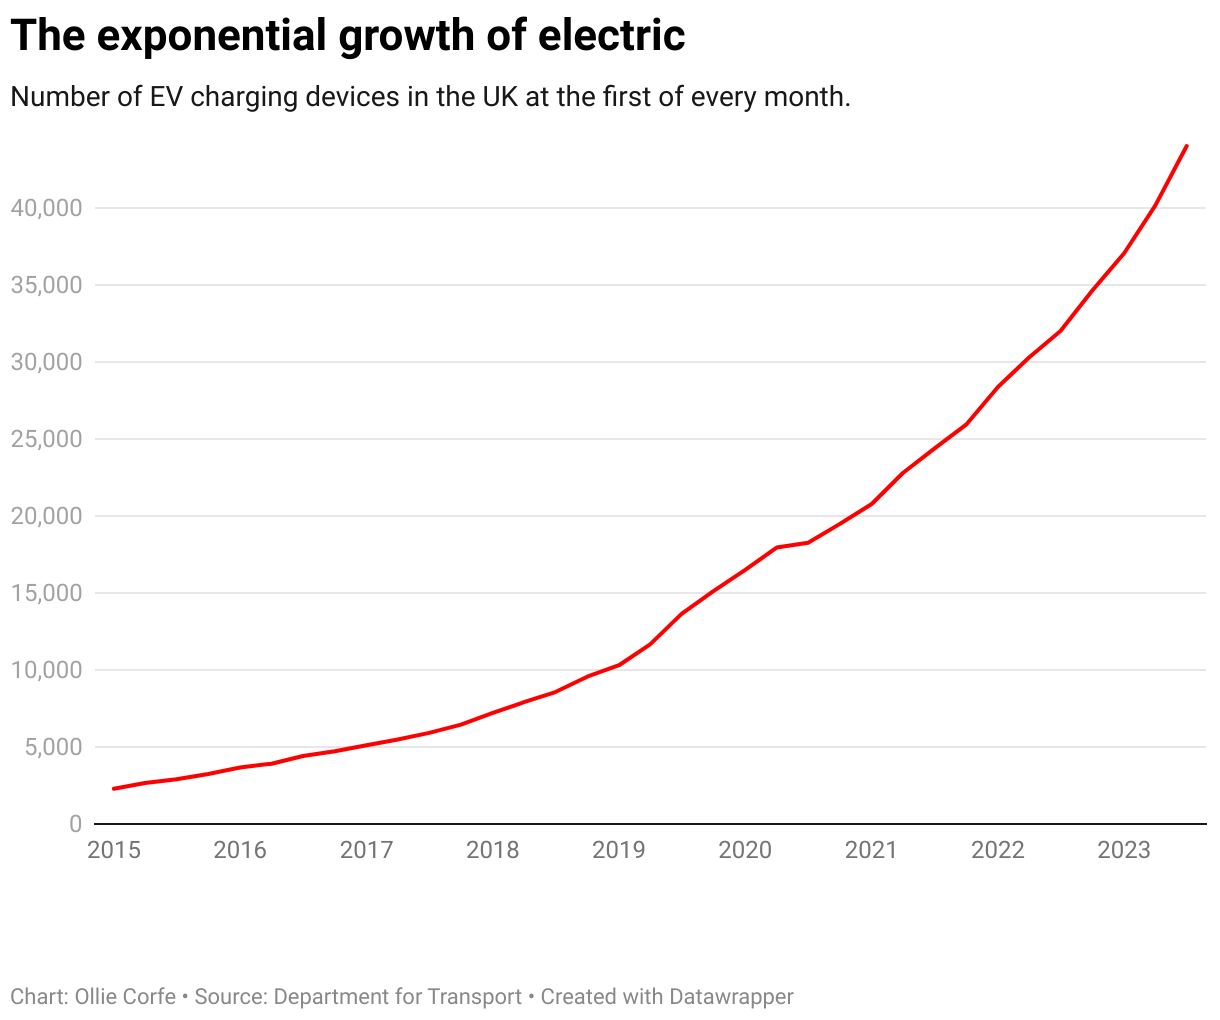 Number of EV chargers.